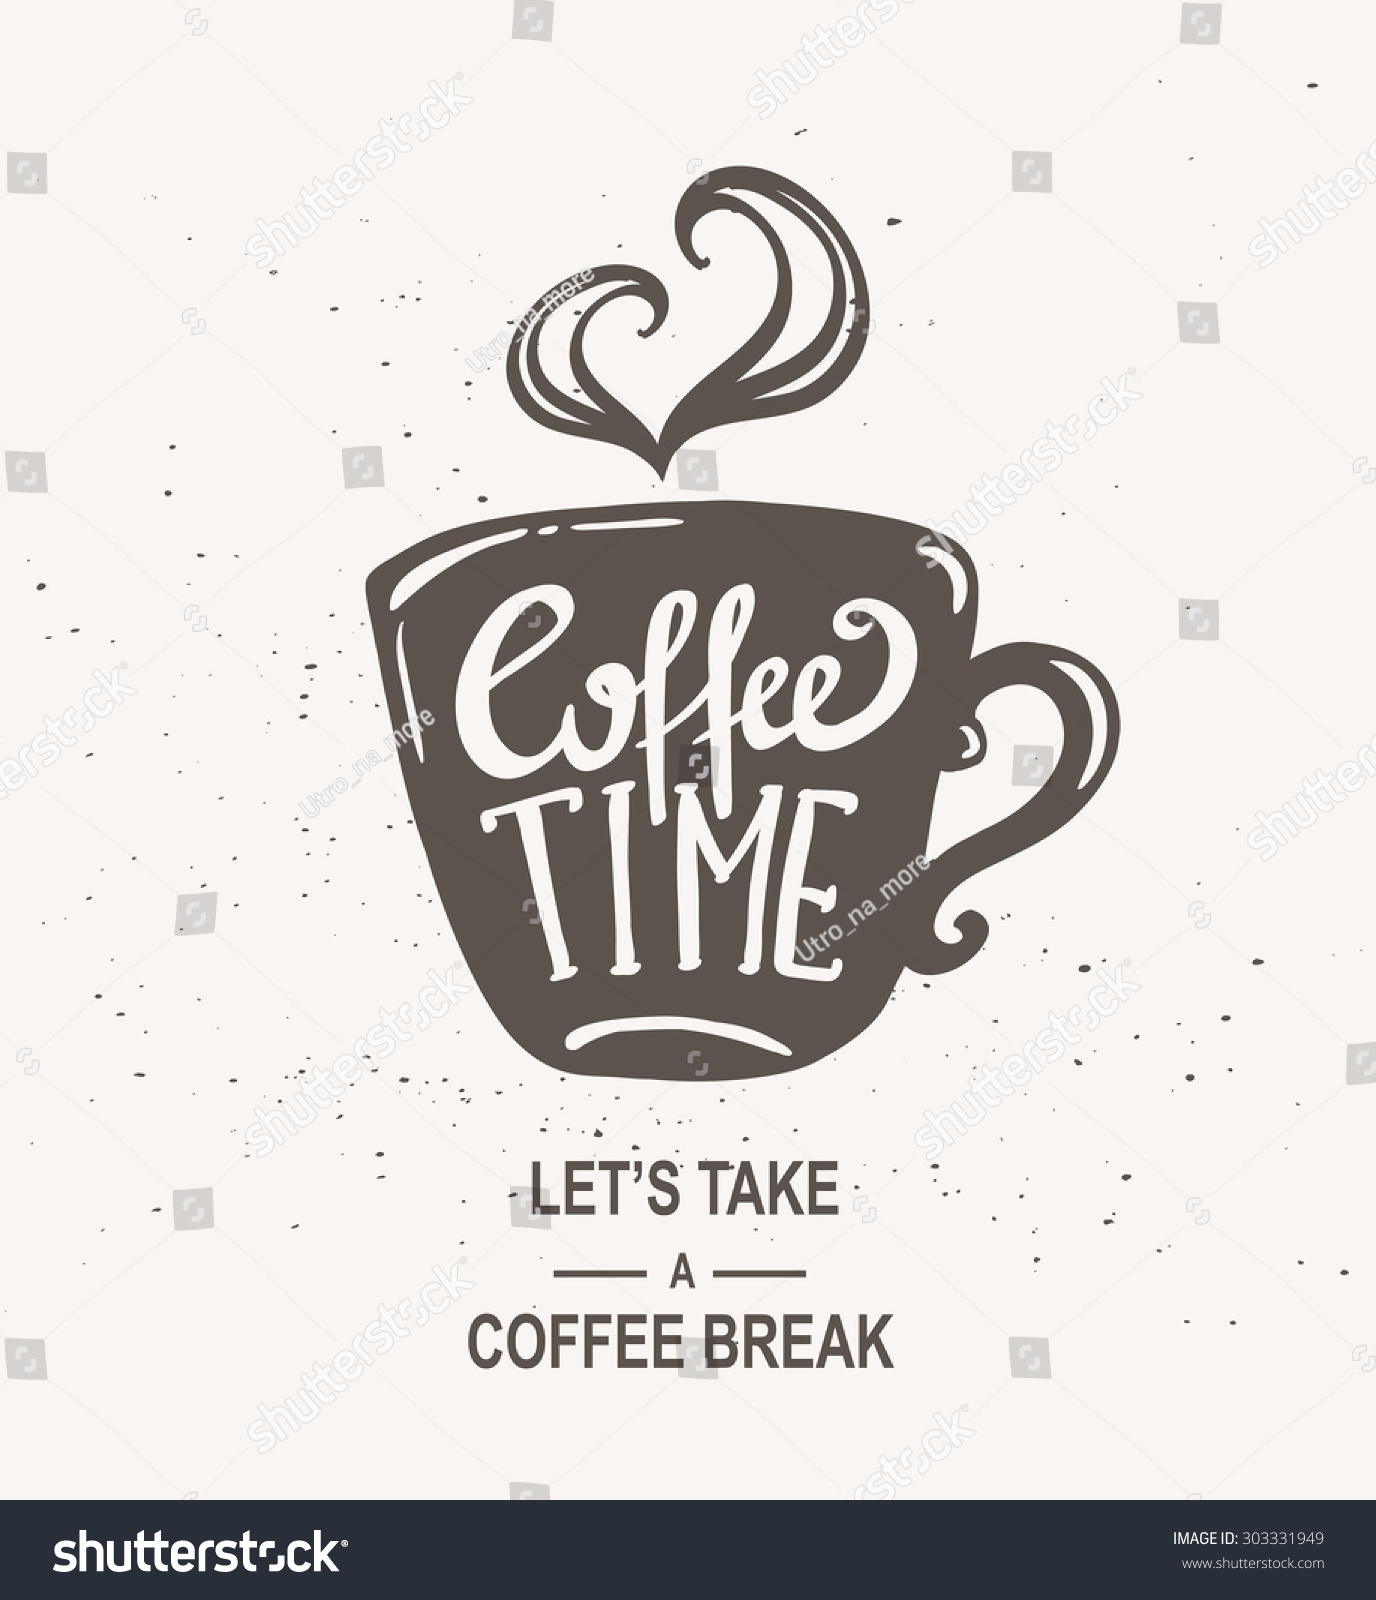 "Coffee time" Hipster Vintage Stylized Lettering. Vector Illustration #303331949